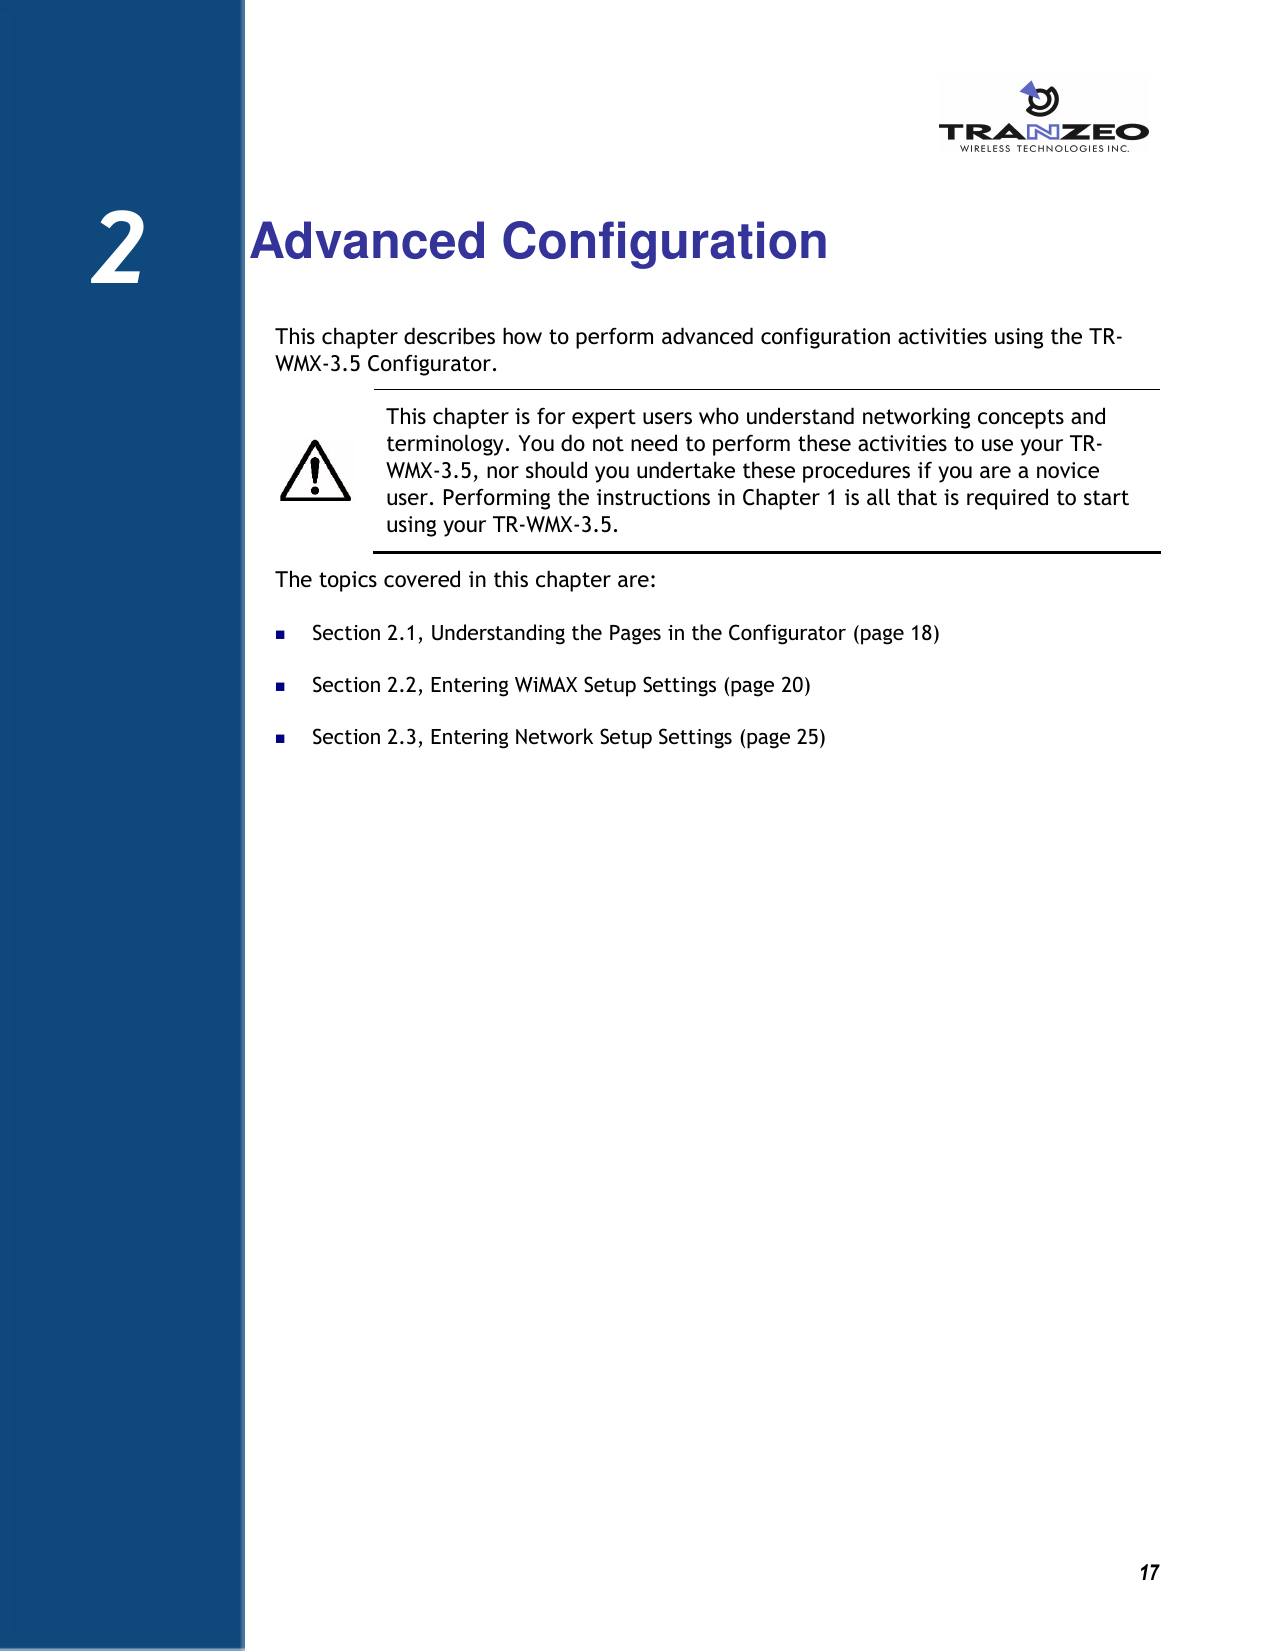   17  2  Advanced Configuration This chapter describes how to perform advanced configuration activities using the TR-WMX-3.5 Configurator.    This chapter is for expert users who understand networking concepts and terminology. You do not need to perform these activities to use your TR-WMX-3.5, nor should you undertake these procedures if you are a novice user. Performing the instructions in Chapter 1 is all that is required to start using your TR-WMX-3.5. The topics covered in this chapter are:  Section 2.1, Understanding the Pages in the Configurator (page 18)  Section 2.2, Entering WiMAX Setup Settings (page 20)  Section 2.3, Entering Network Setup Settings (page 25)   2 